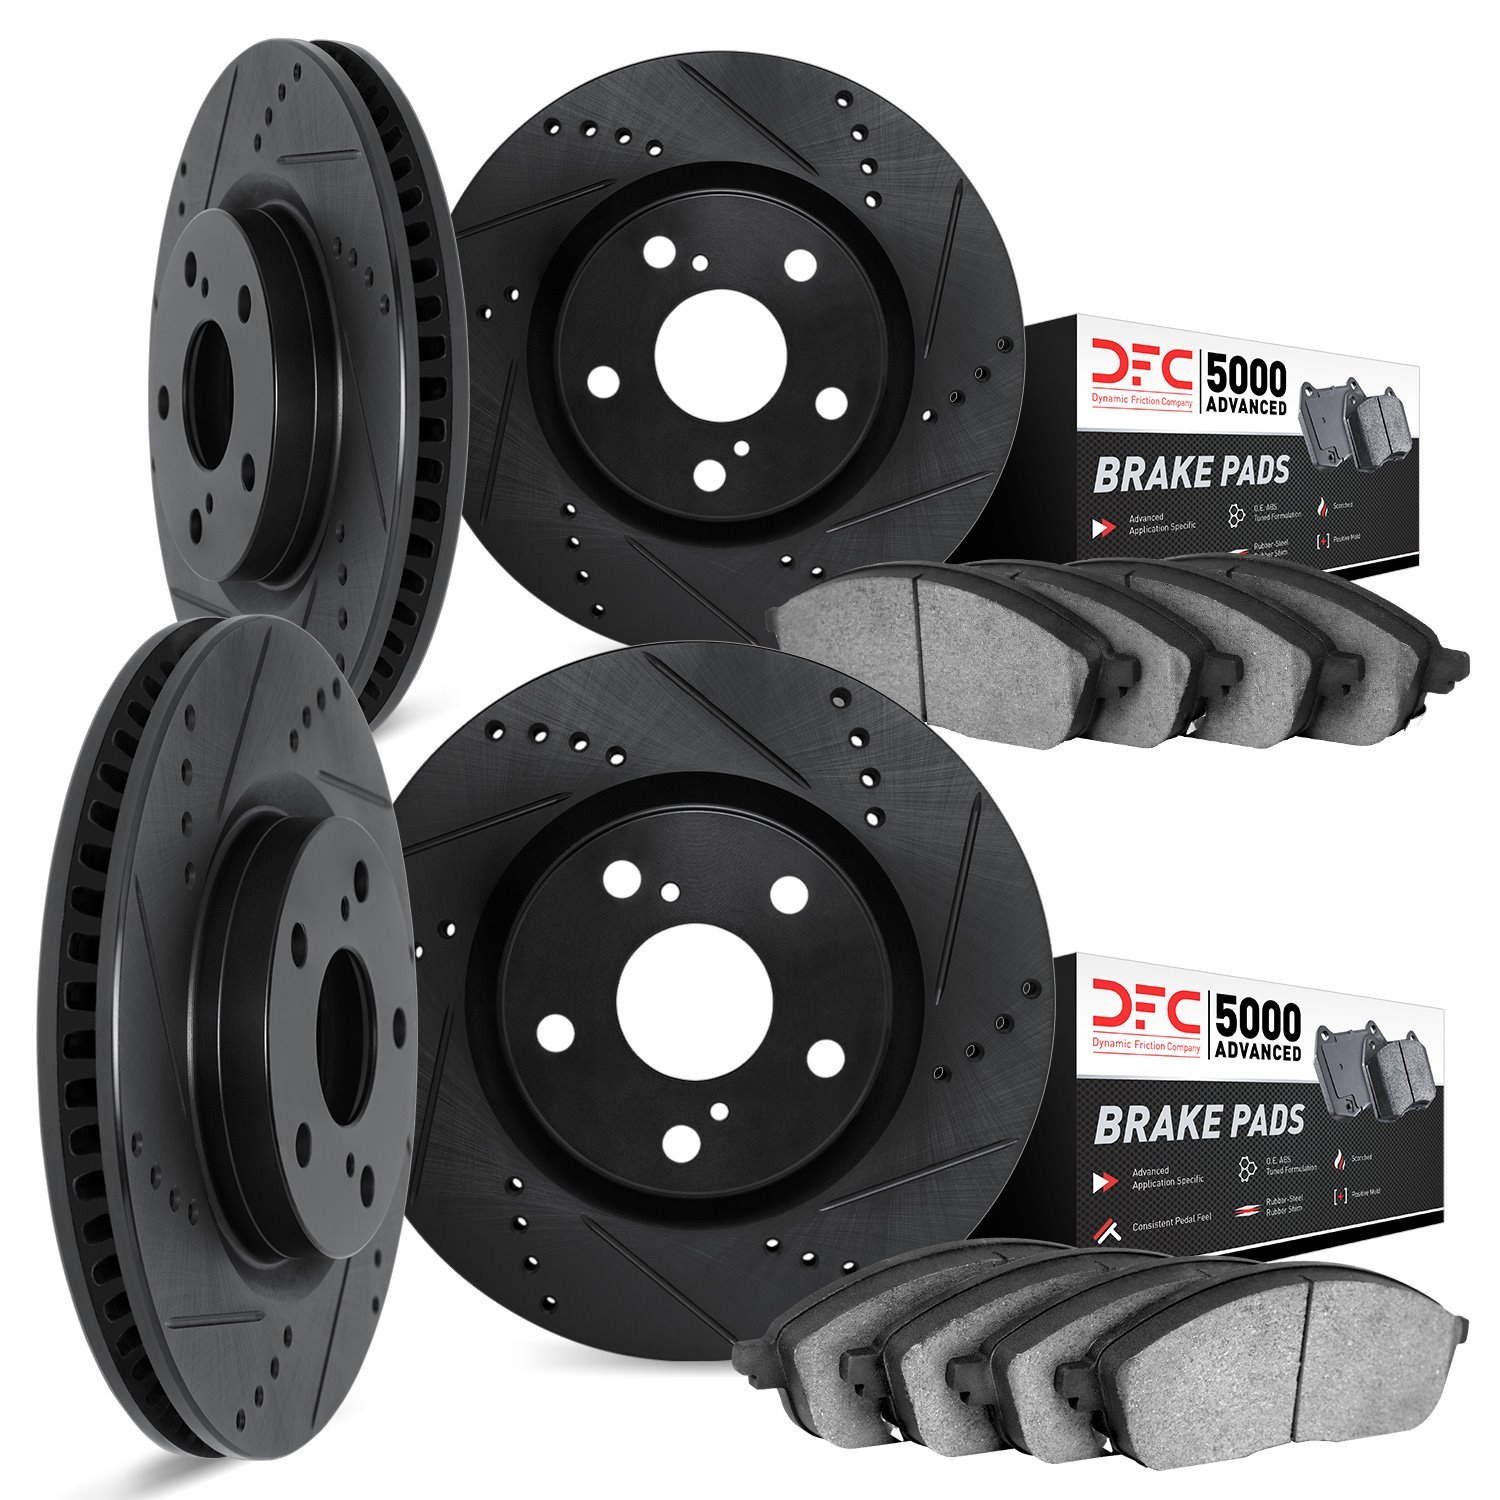 8504-63004 Drilled/Slotted Brake Rotors w/5000 Advanced Brake Pads Kit [Black], 2018-2019 Mercedes-Benz, Position: Front and Rea